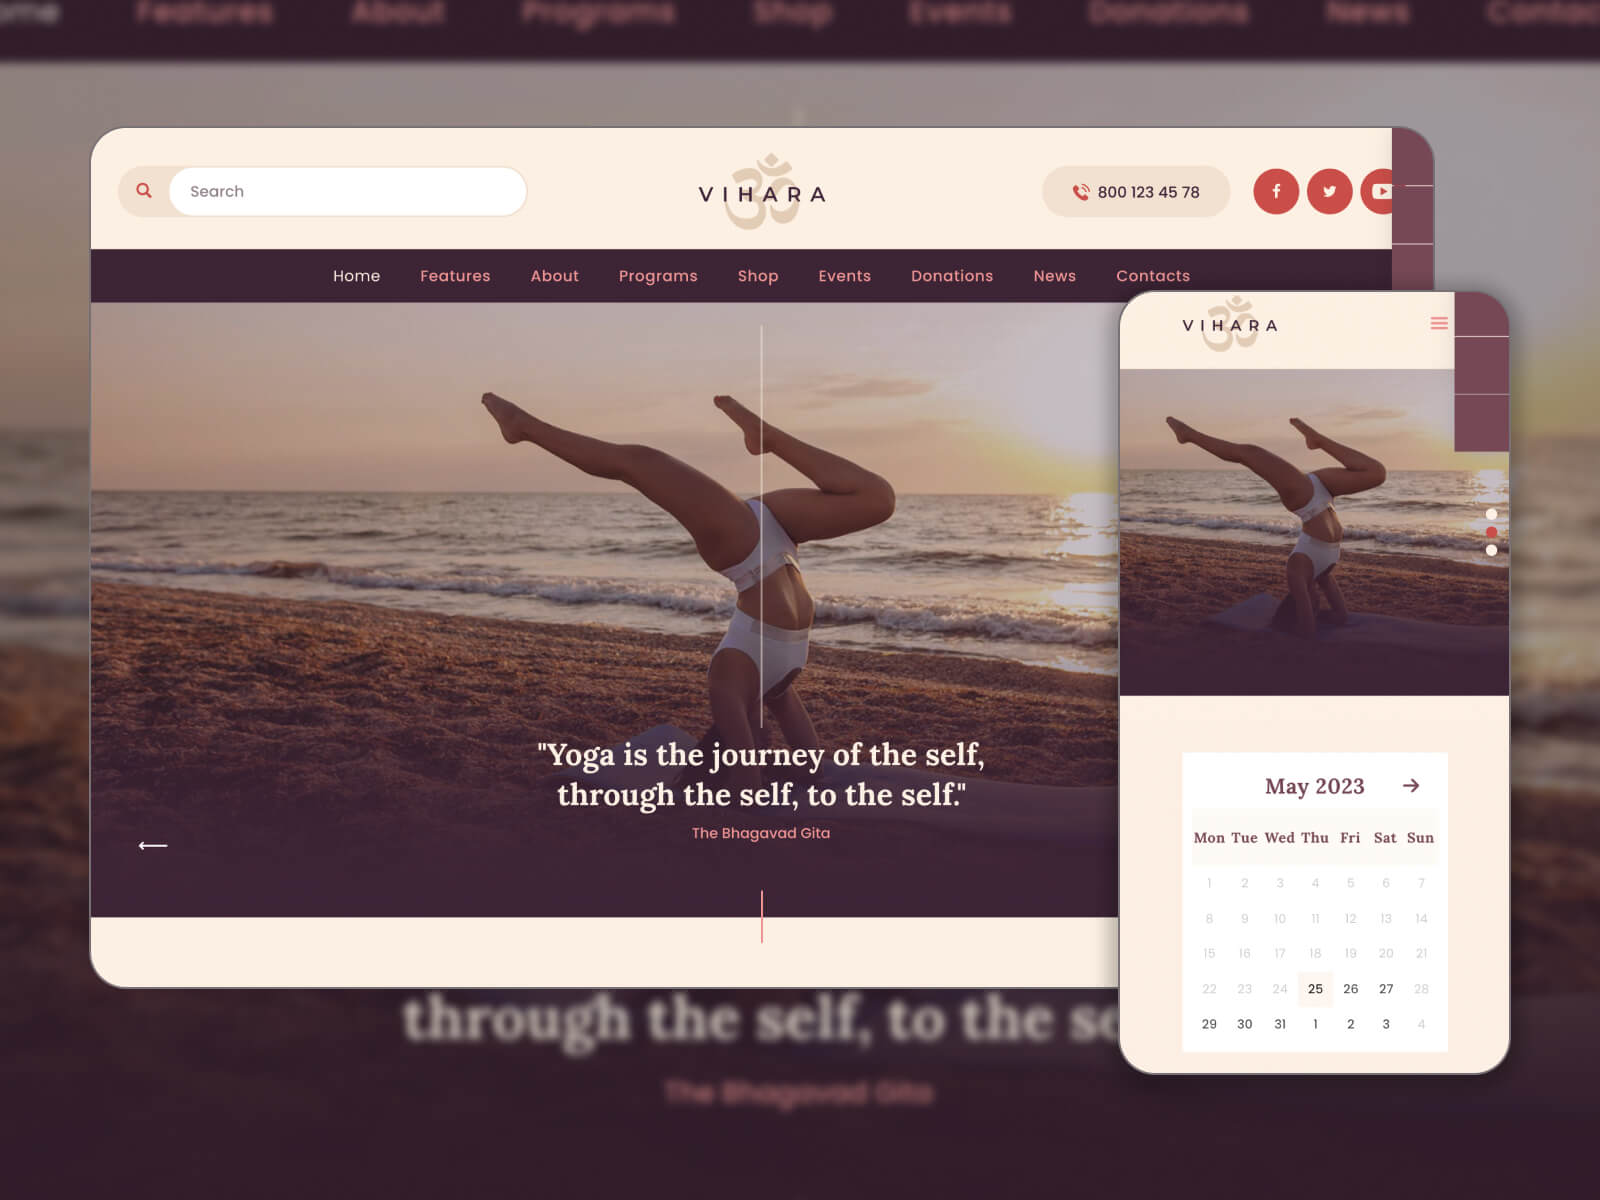 Picture of Vihara - mobile-friendly WordPress theme for yoga websites in darkslategray, linen, dimgray, gray, and darkgray color array